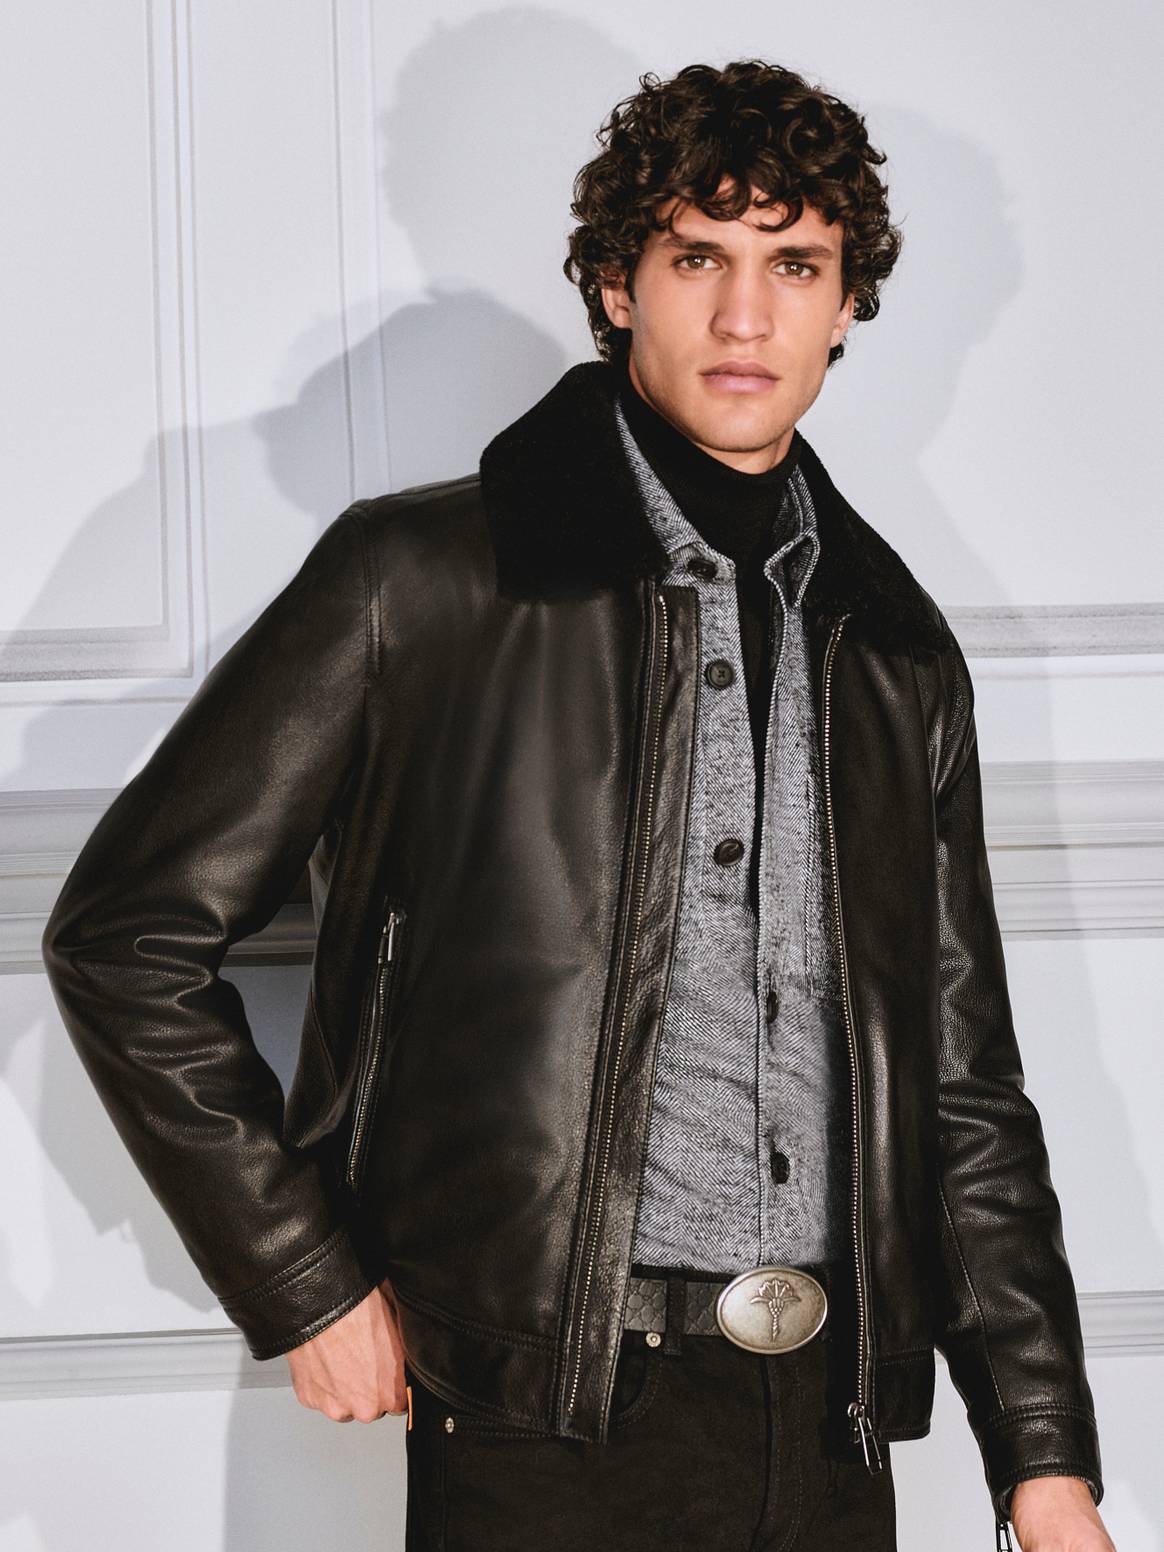 Picture: JOOP!, Men FW23 Collection, courtesy of the brand